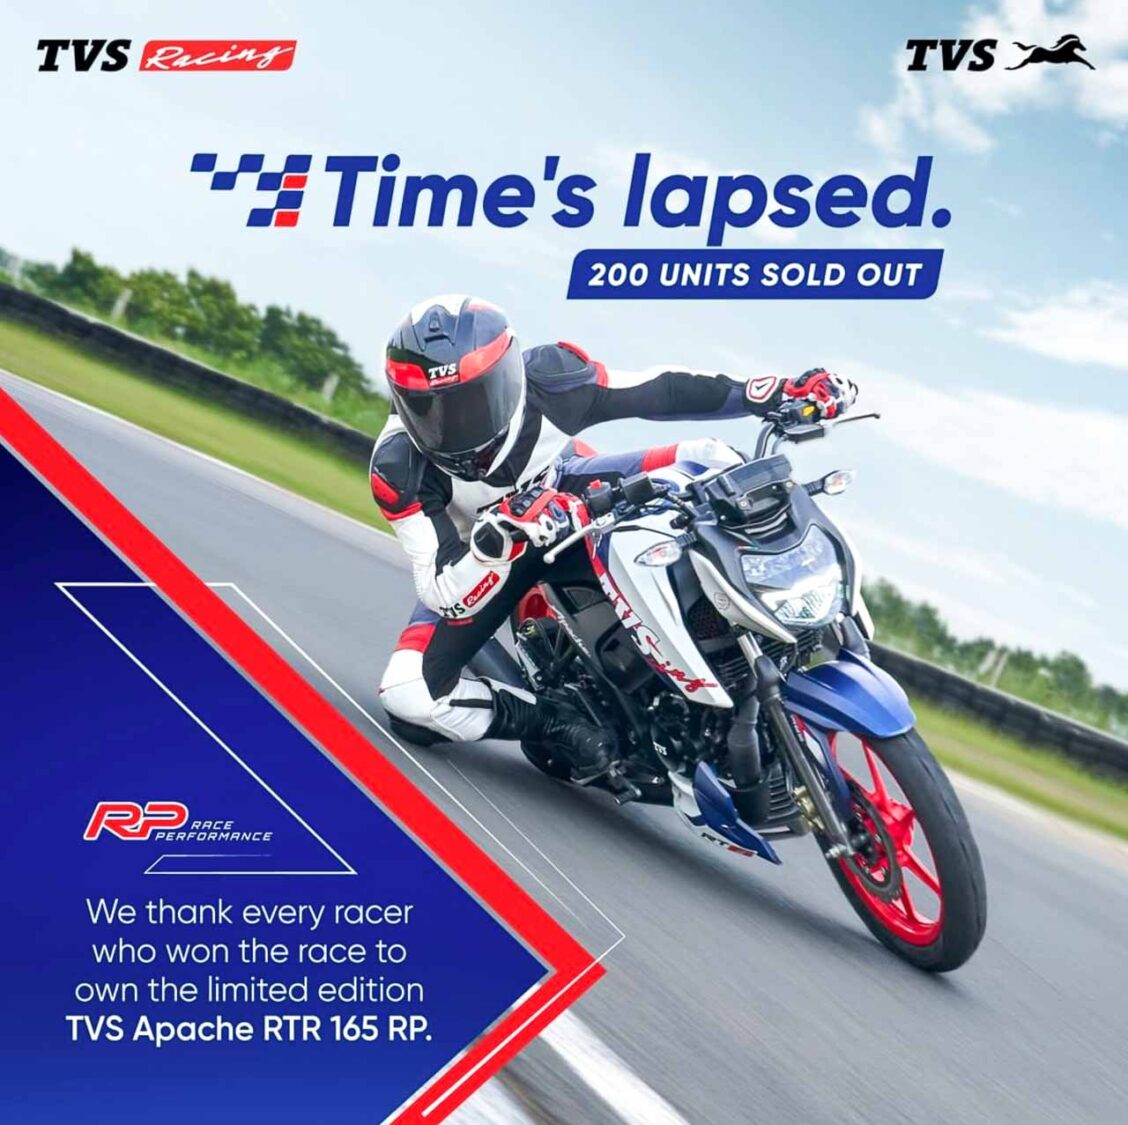 TVS Motors launches its new range of riding gear and apparels